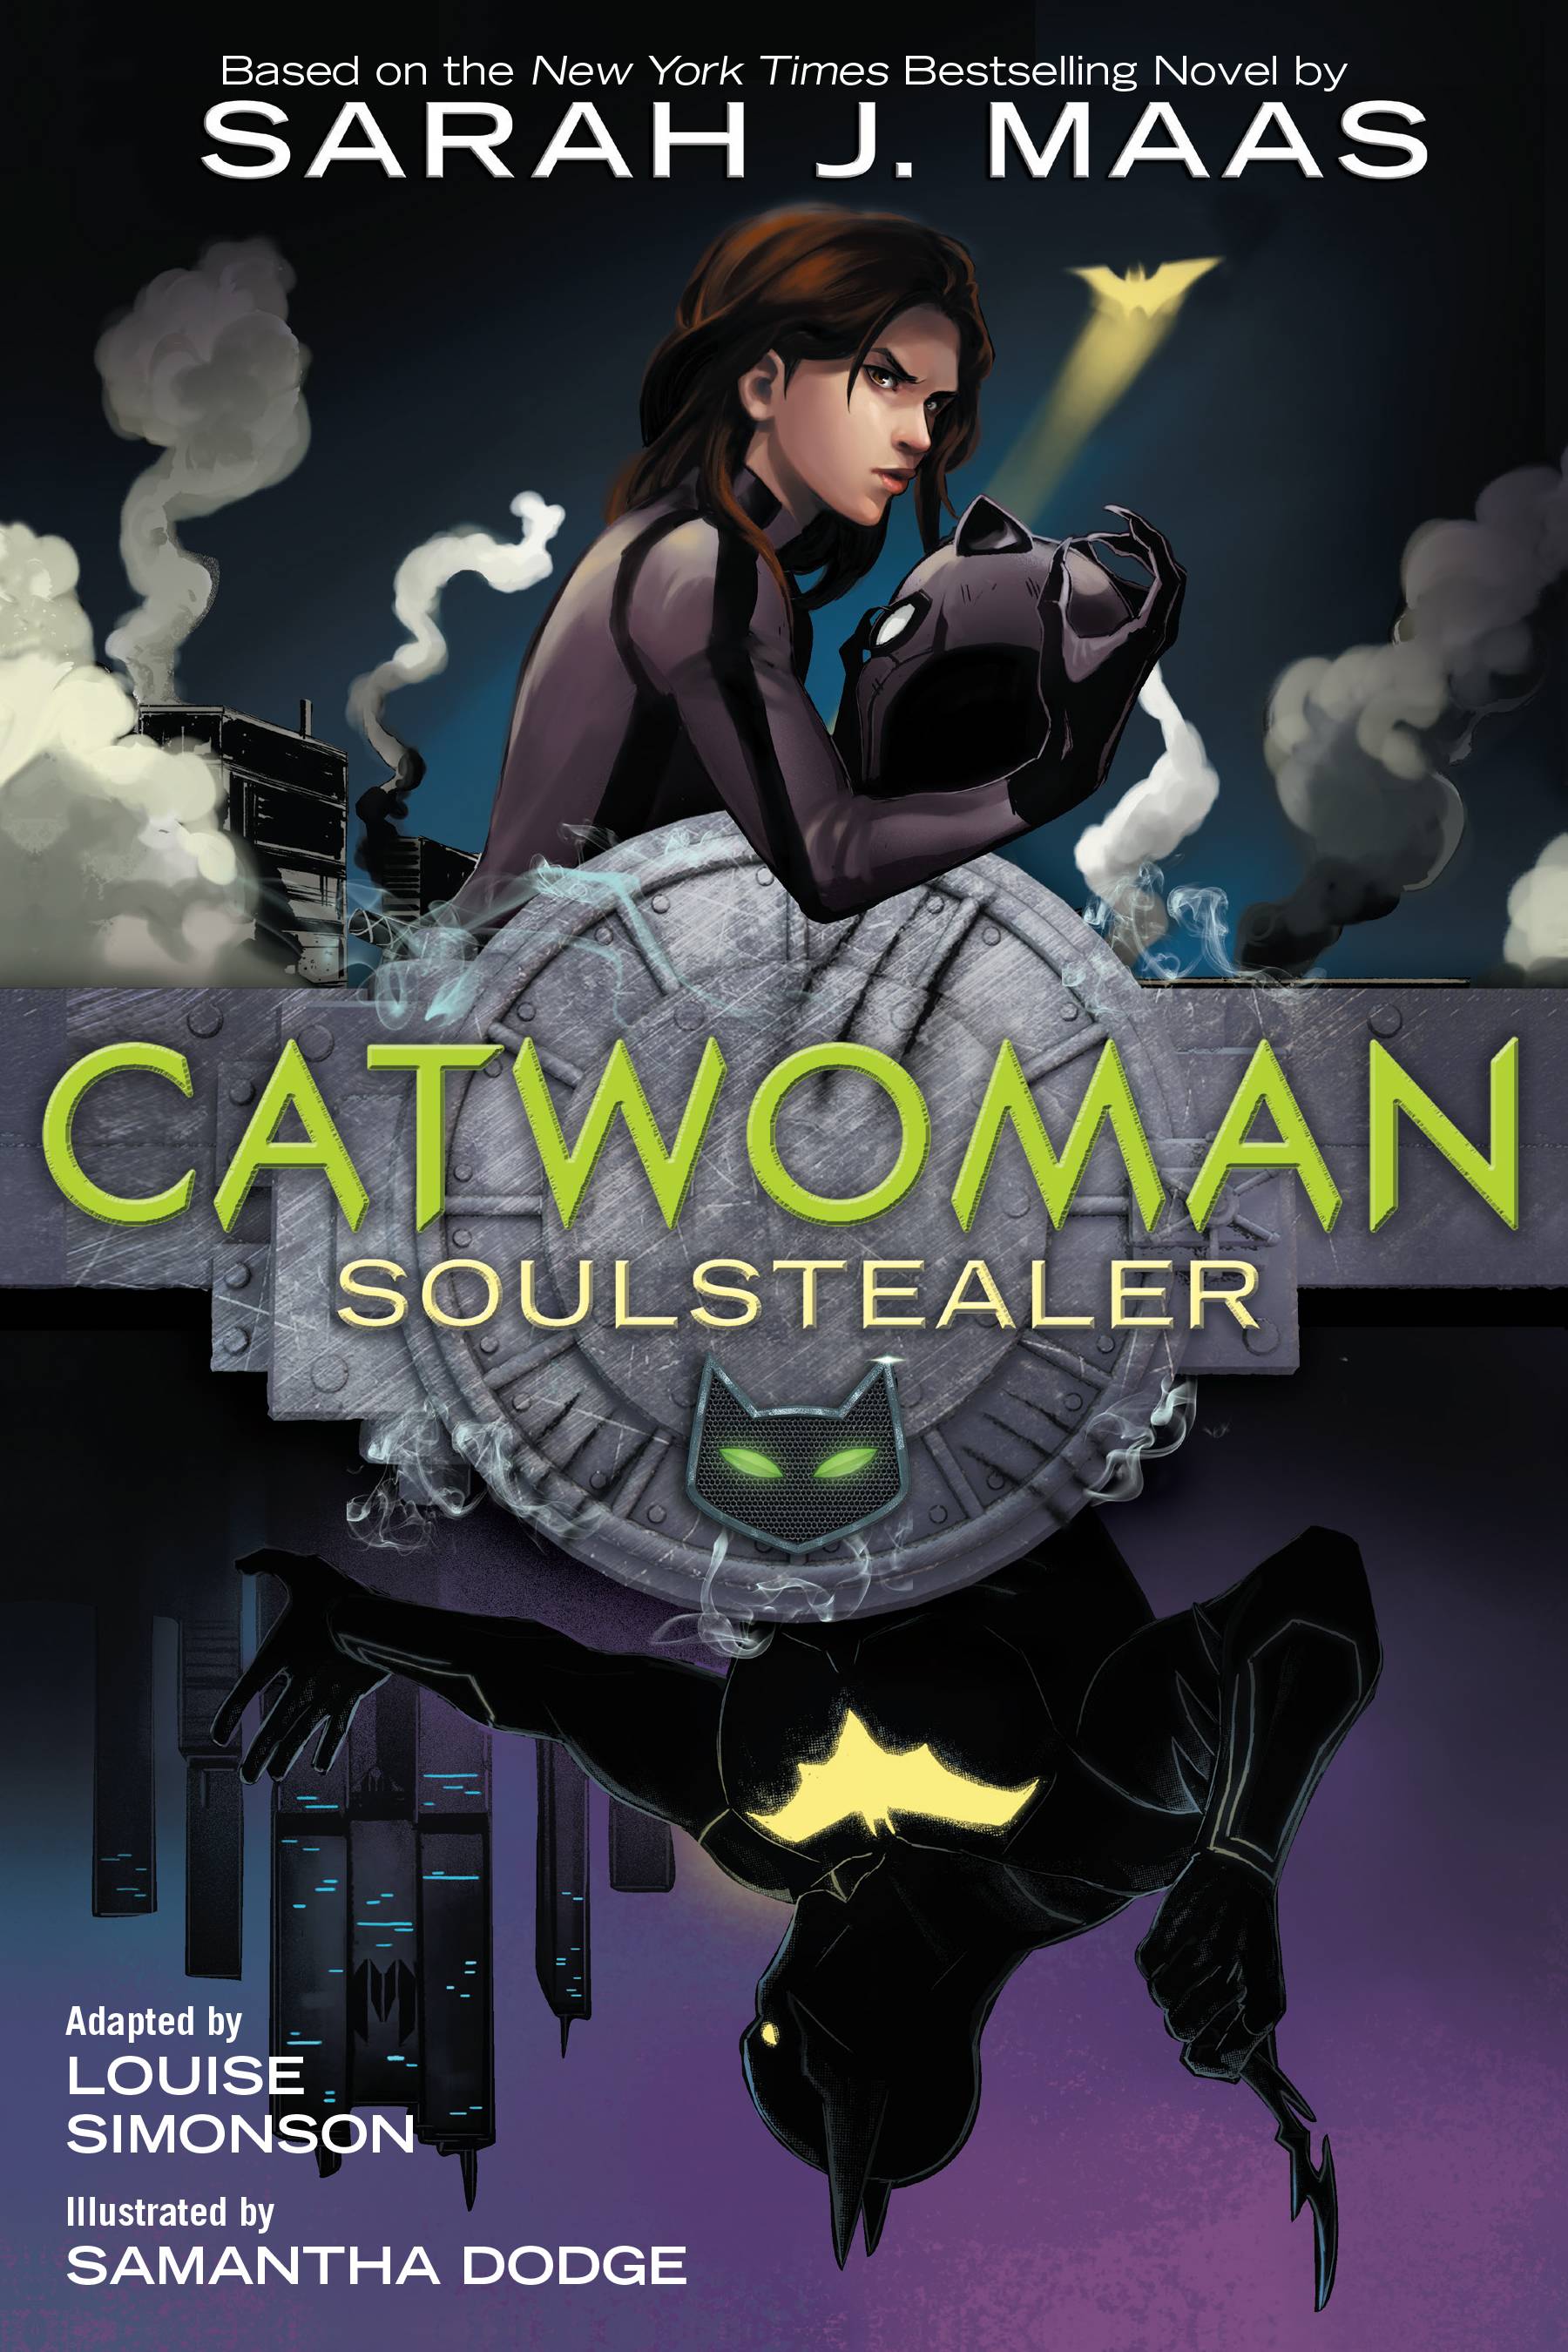 Catwoman: Soulstealer - The Graphic Novel s/c